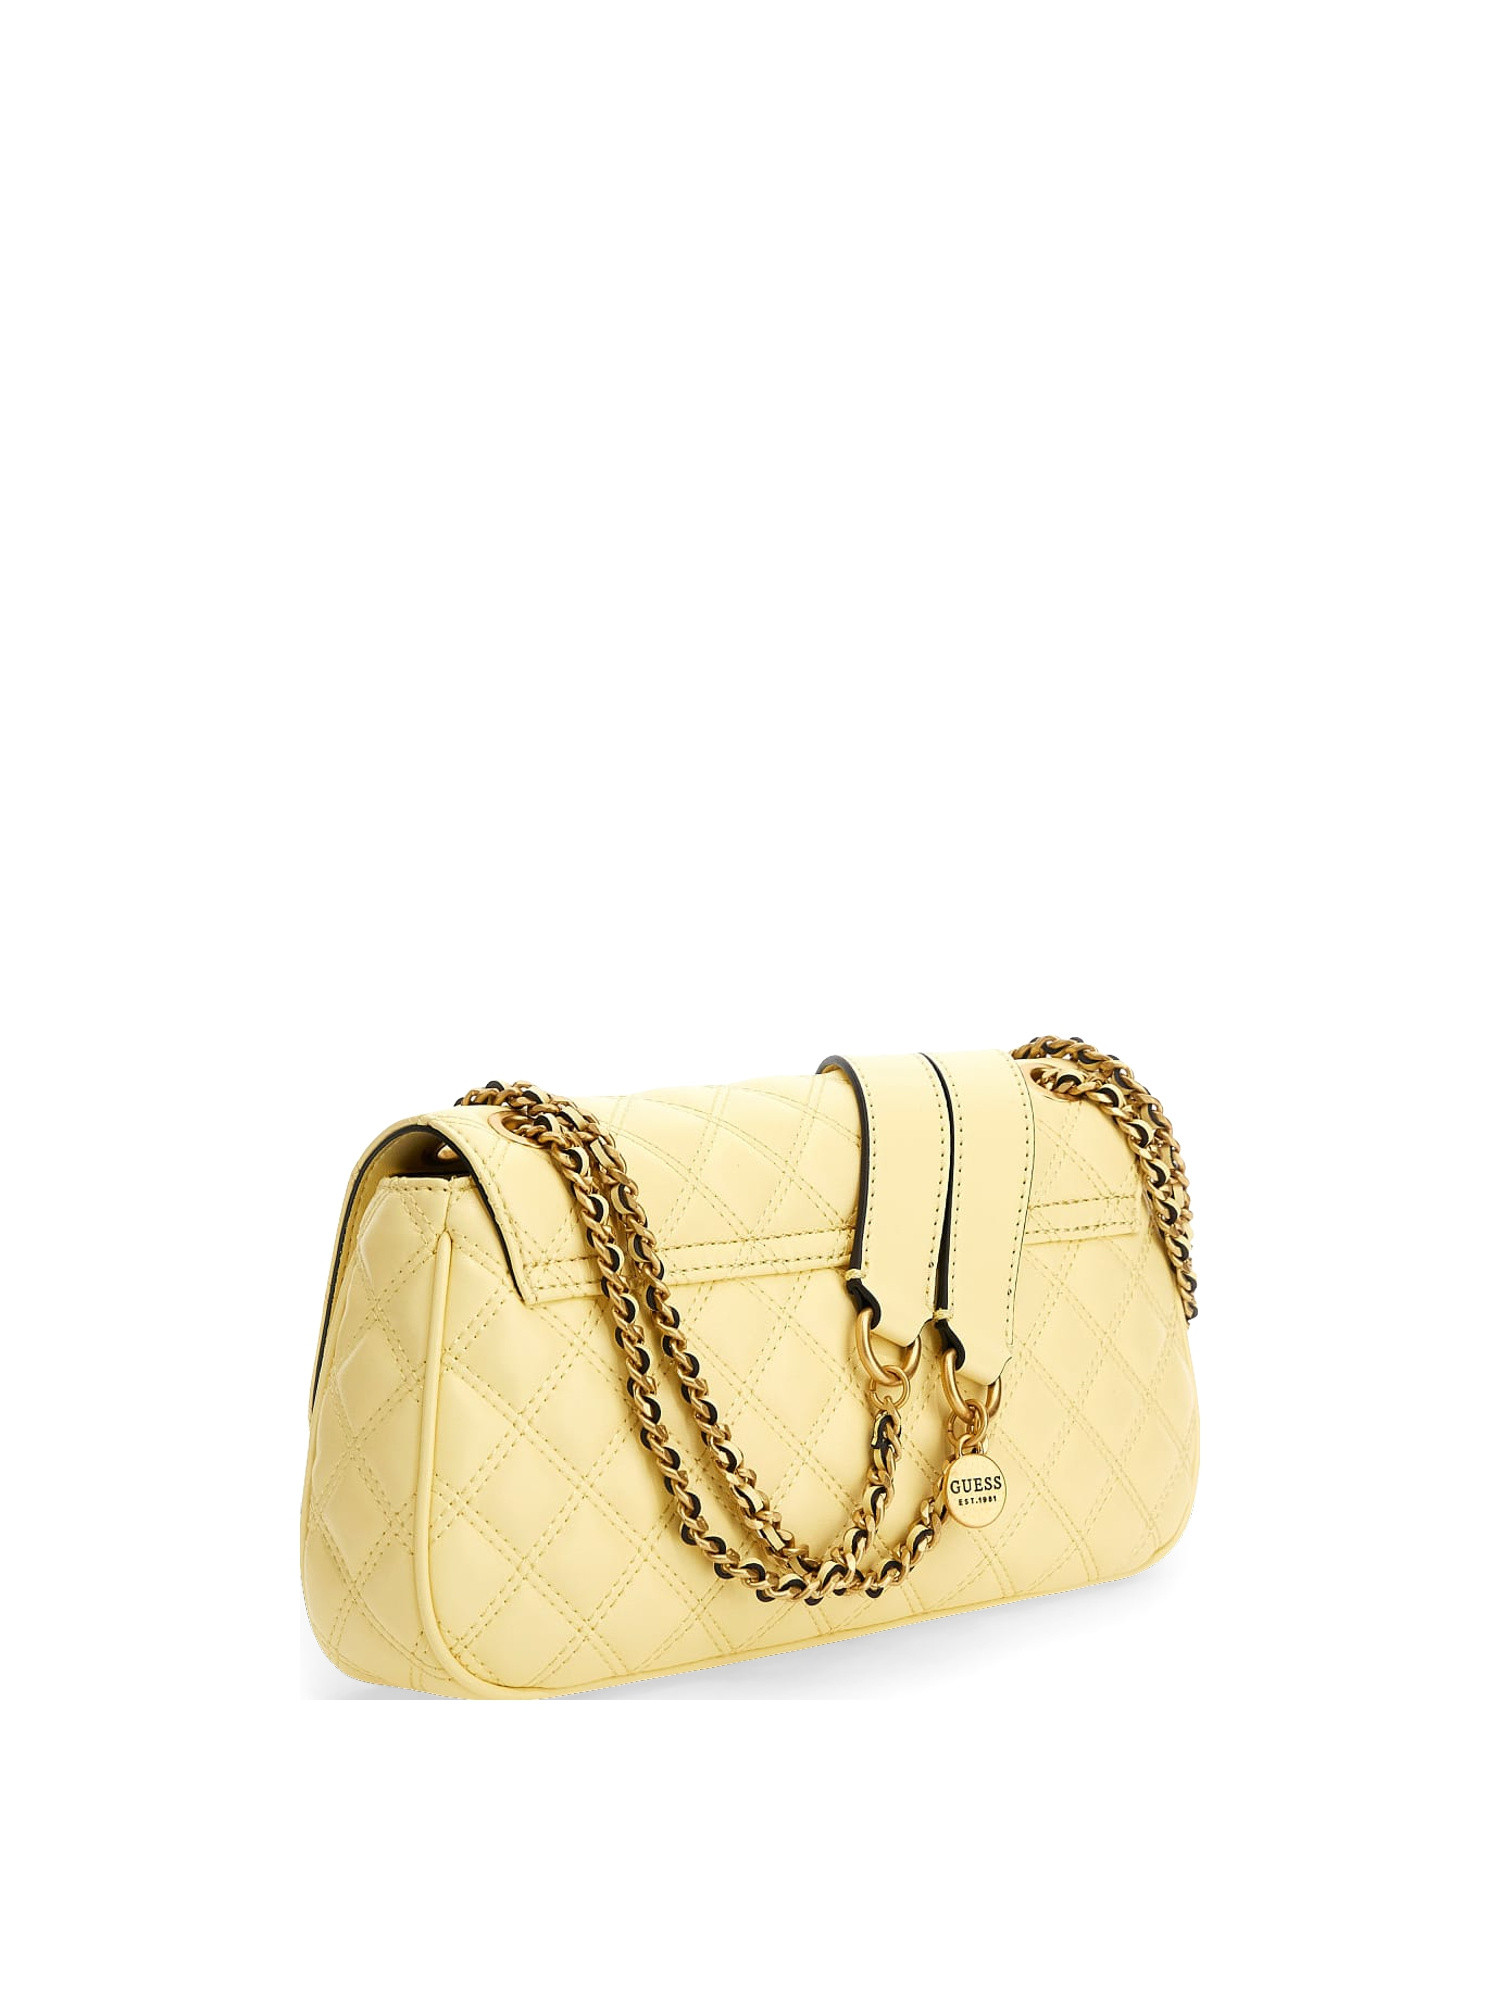 Guess - Giully quilted shoulder bag, Yellow, large image number 1